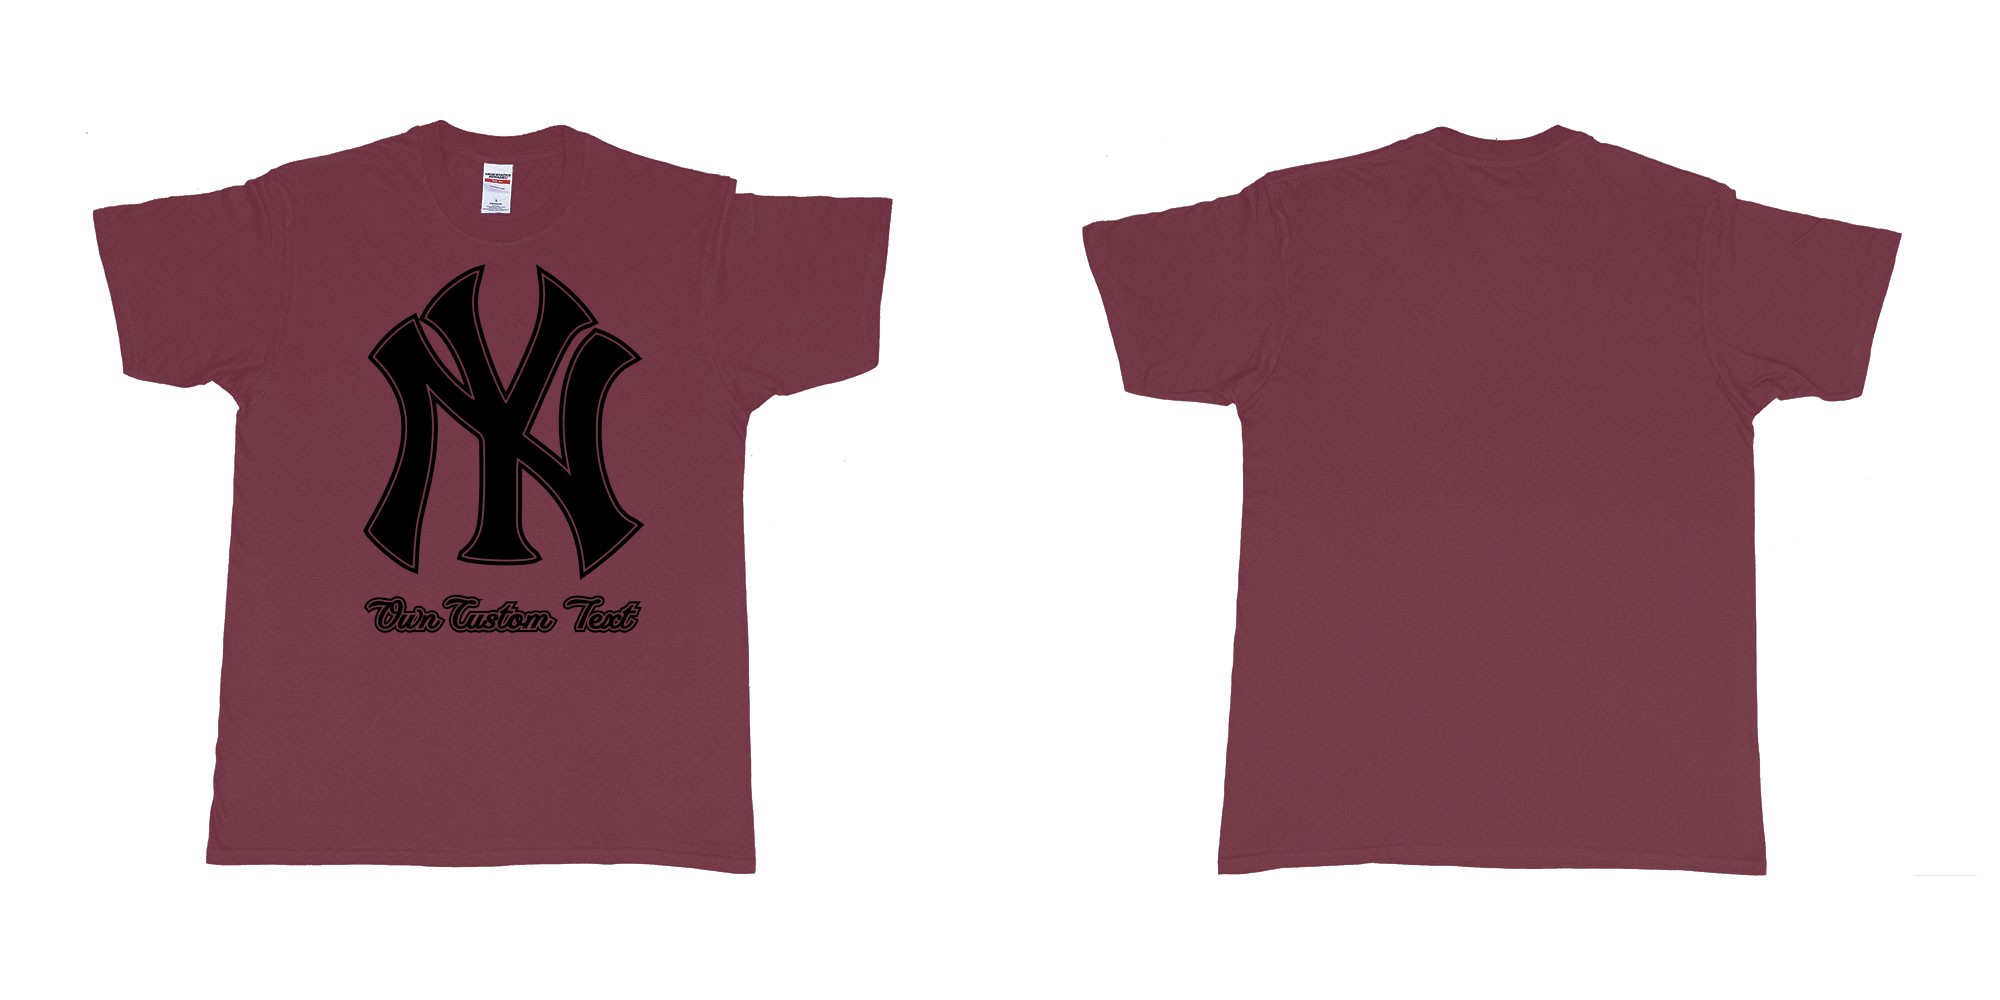 Custom tshirt design new york yankees baseball team custom design in fabric color marron choice your own text made in Bali by The Pirate Way